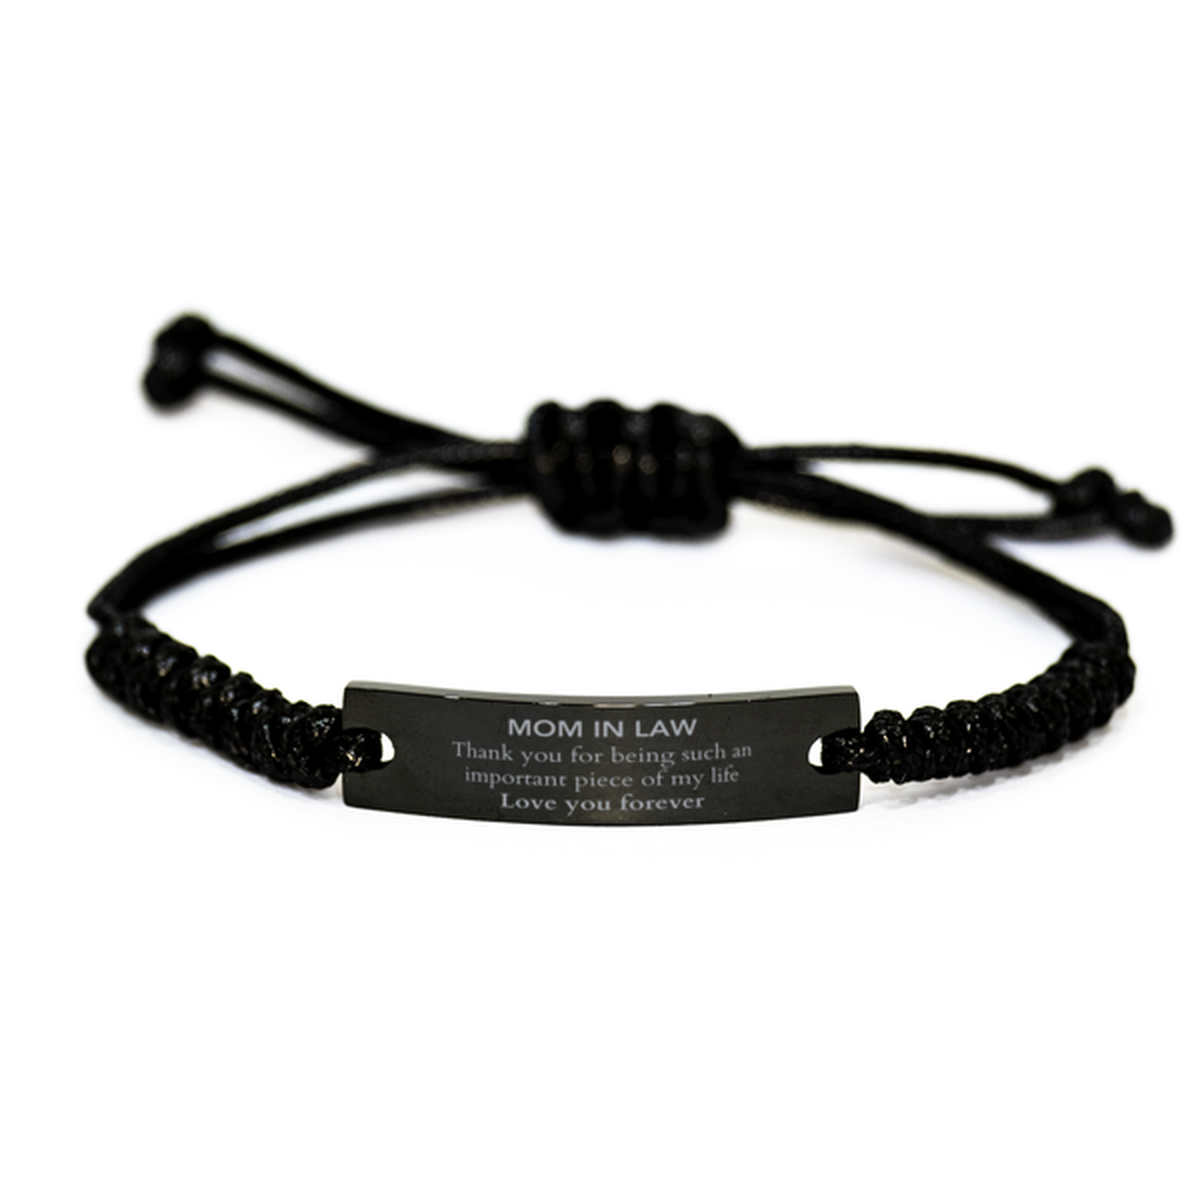 Appropriate Mom In Law Black Rope Bracelet Epic Birthday Gifts for Mom In Law Thank you for being such an important piece of my life Mom In Law Christmas Mothers Fathers Day